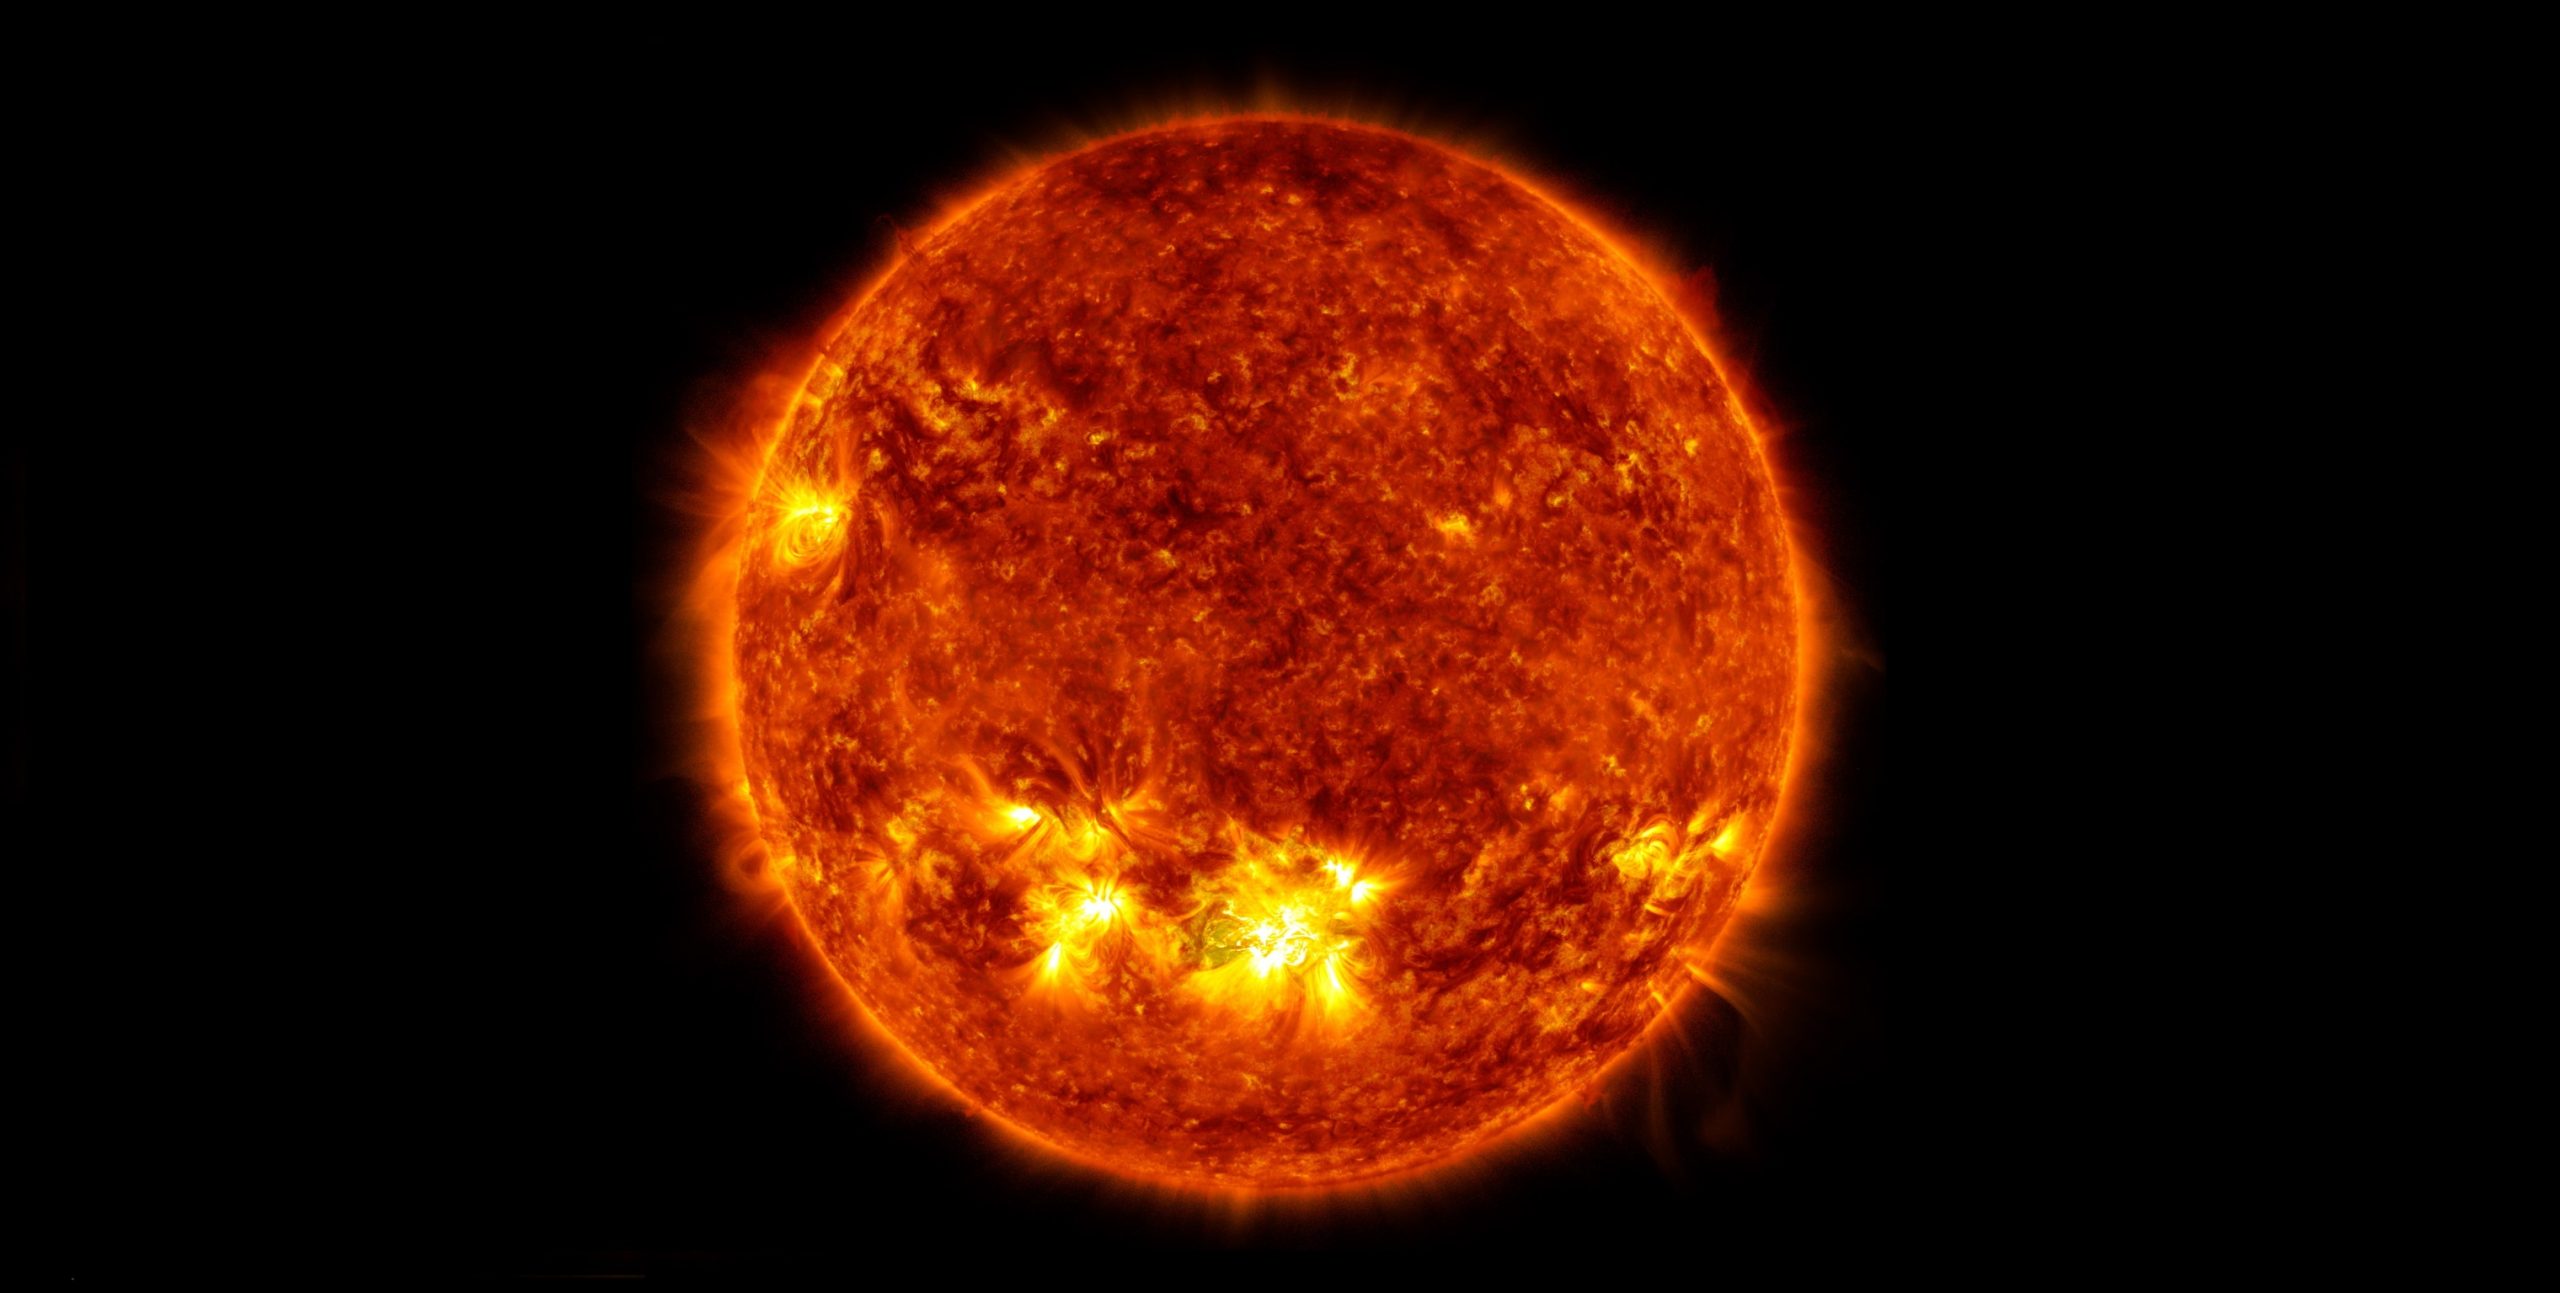 A solar flare occured 9200 years ago. This image was taken by NASA's Solar Dynamics Observatory. Credit: NASA/GSFC/SDO